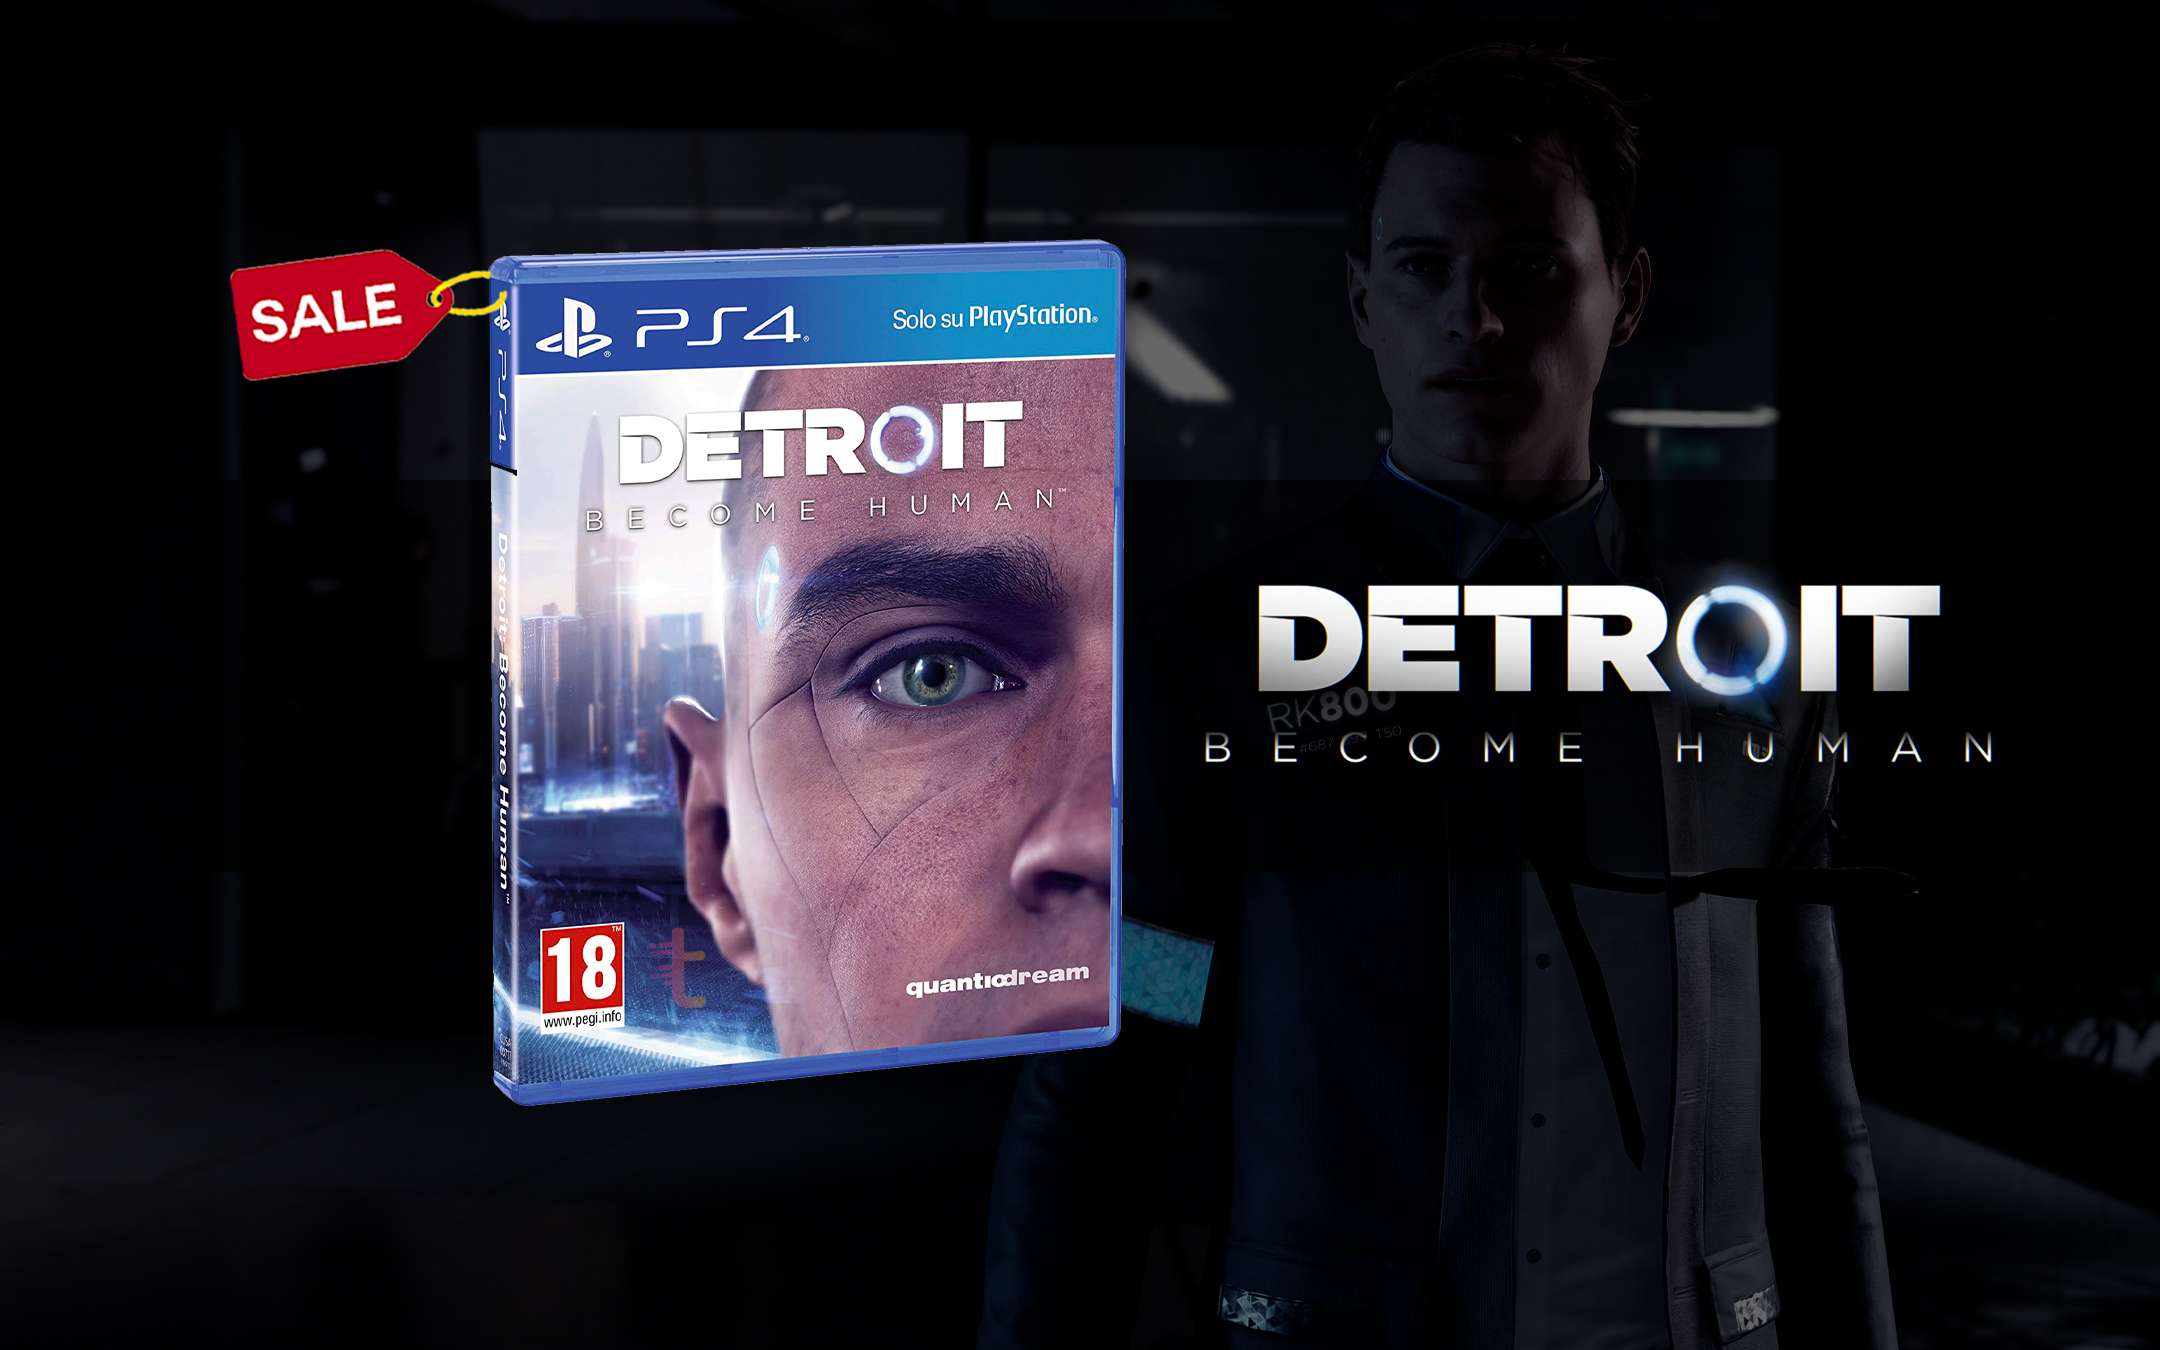 Detroit: Become Human per PS4 in offerta a 19,99€ (-36%)